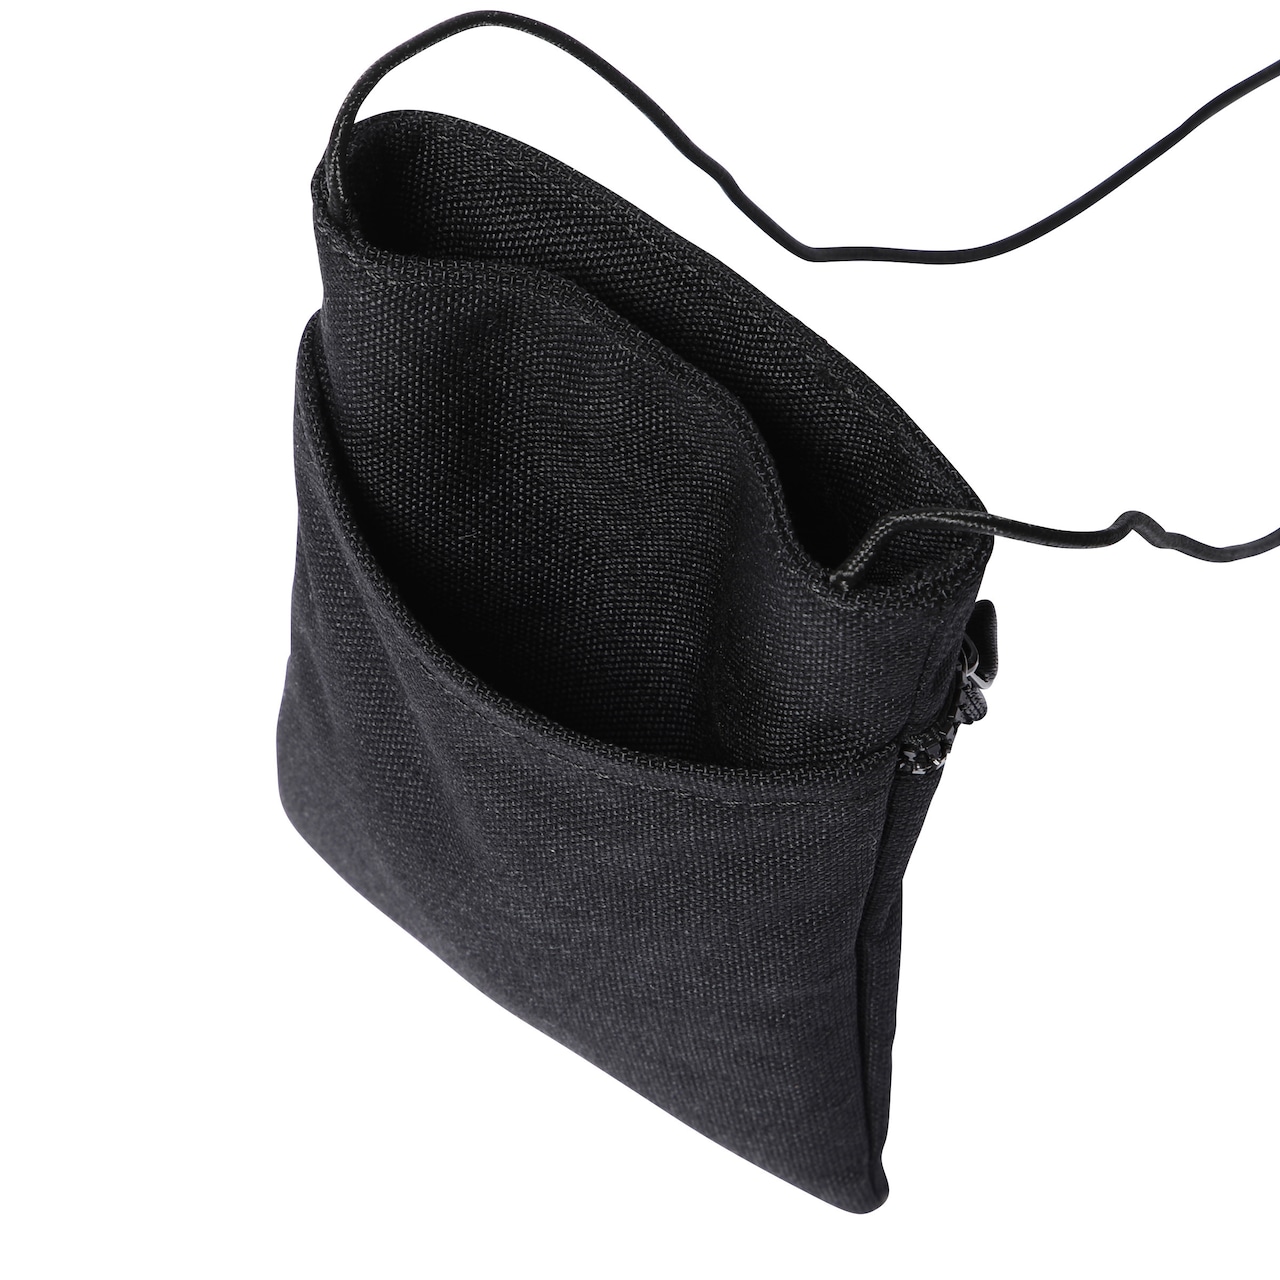 OUTDOOR PRODUCTS x RAMIDUS  NECK POUCH